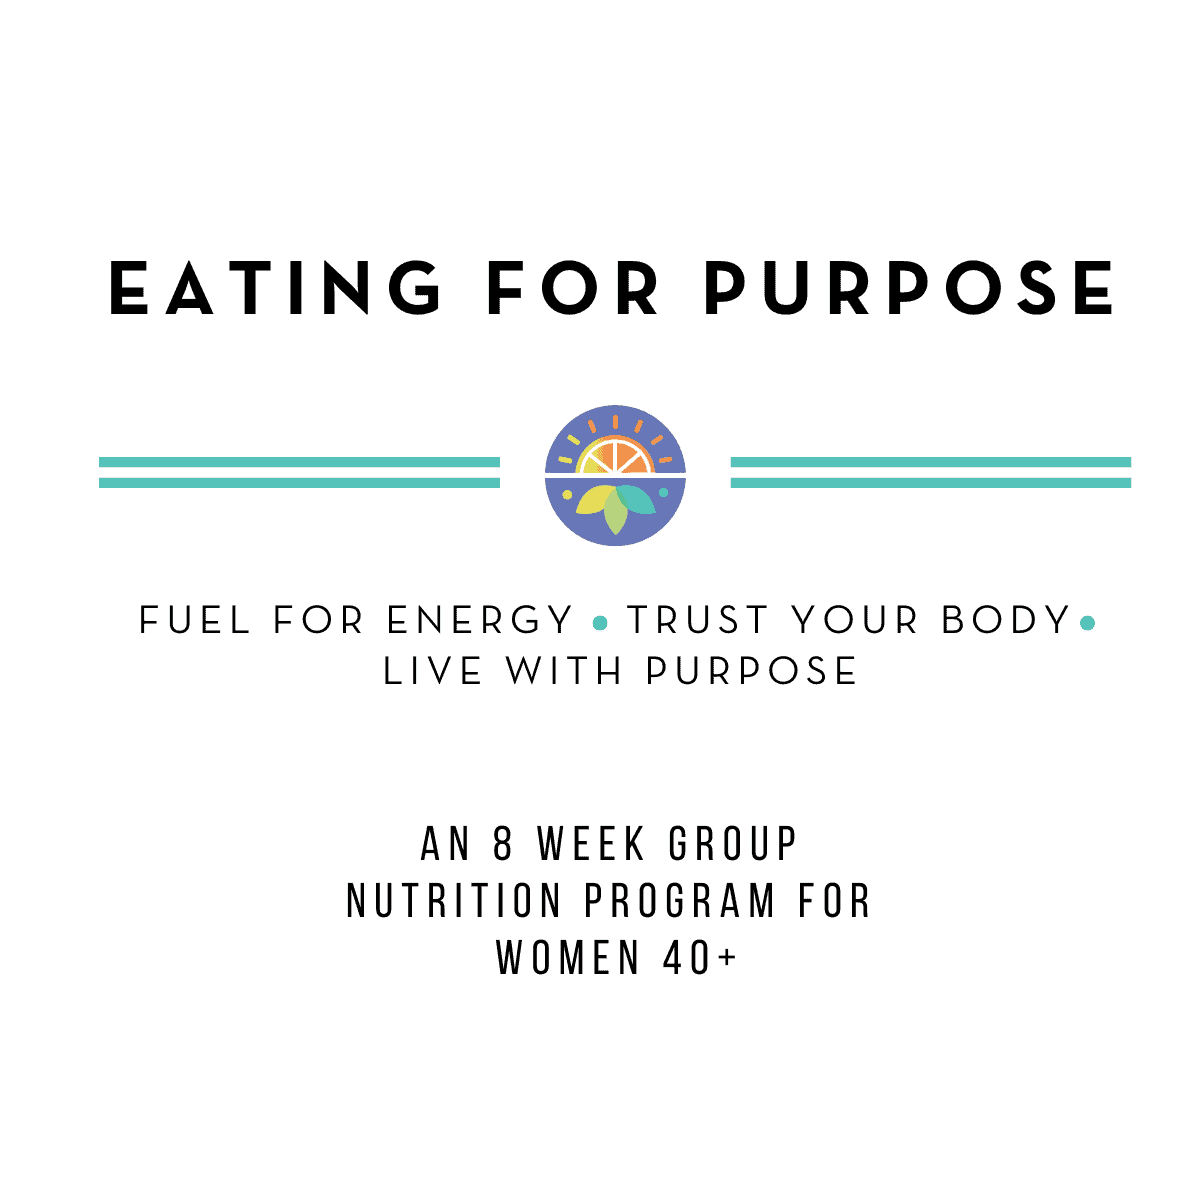 Eating for Purpose. Fuel For Energy, Trust Your Body, Live With Purpose. An 8 week group nutrition program for women 40+